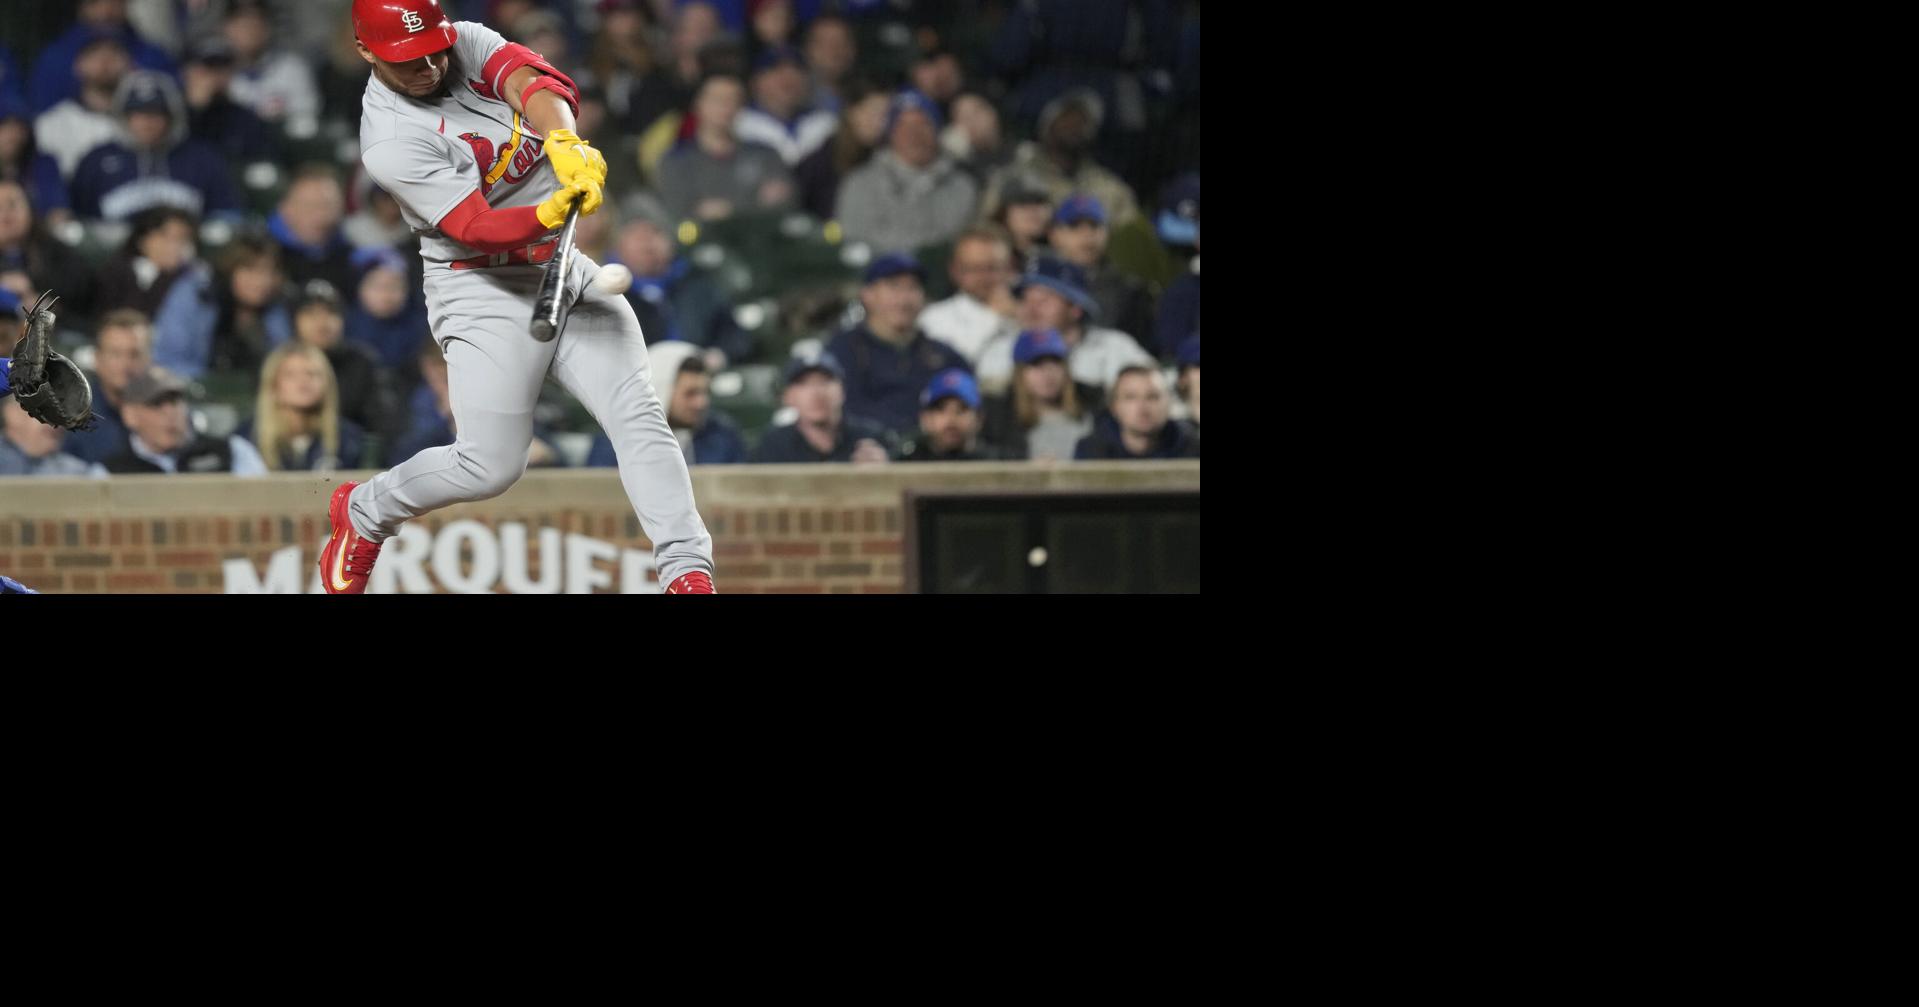 Willson Contreras expects '50-50' split of boos, cheers – NBC Sports Chicago